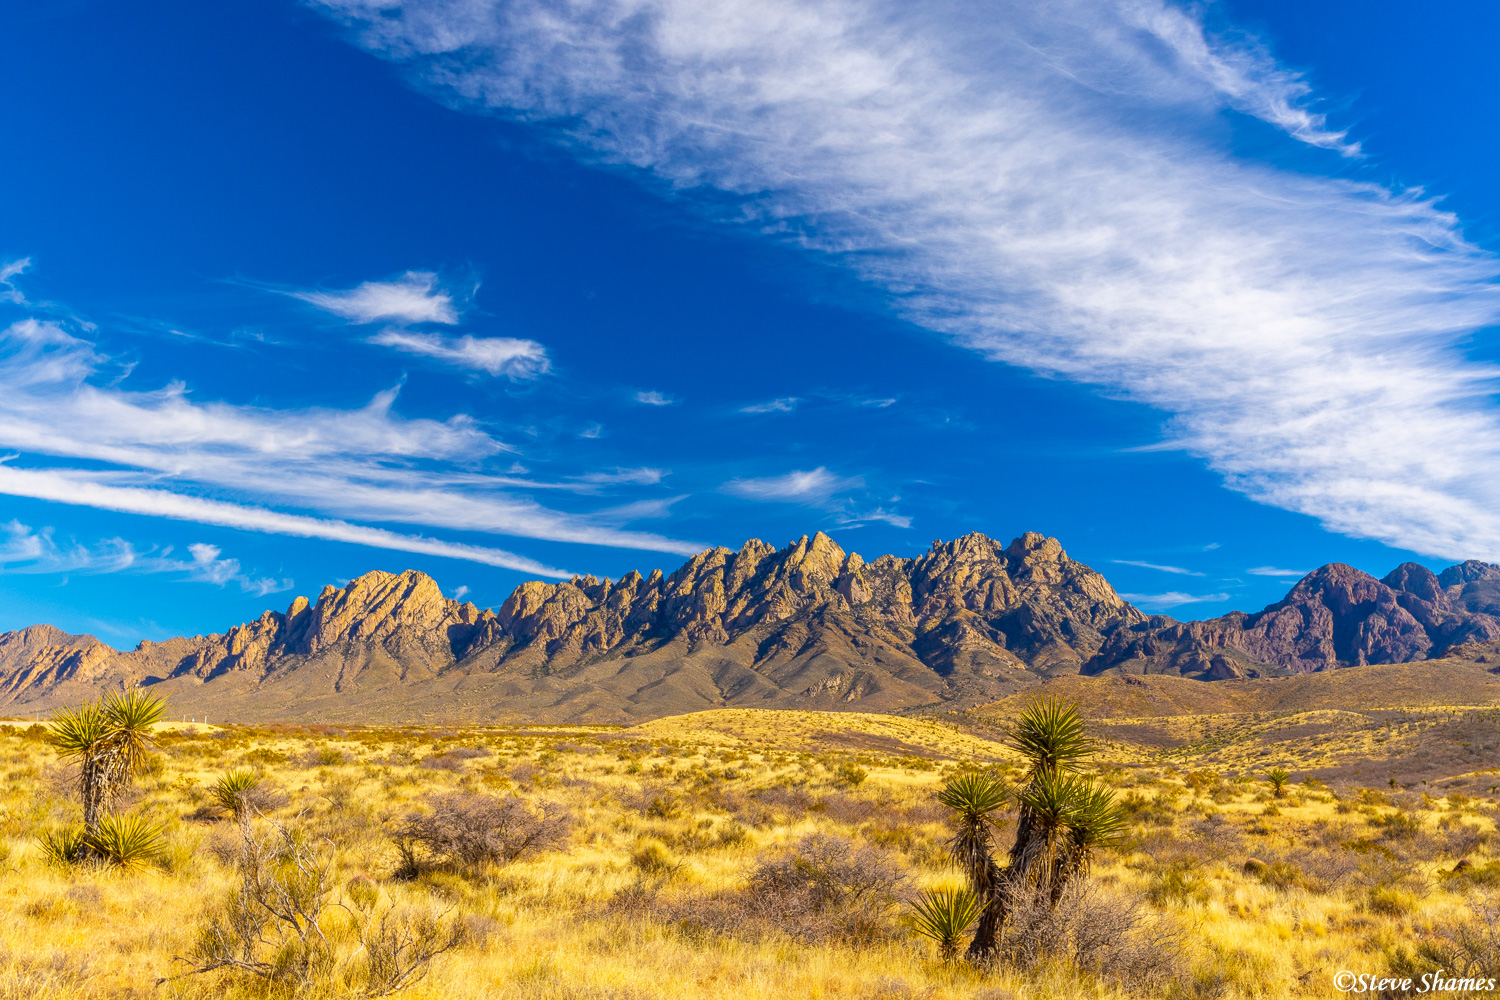 Some of the most scenic mountains in New Mexico, the Organ Mountains.